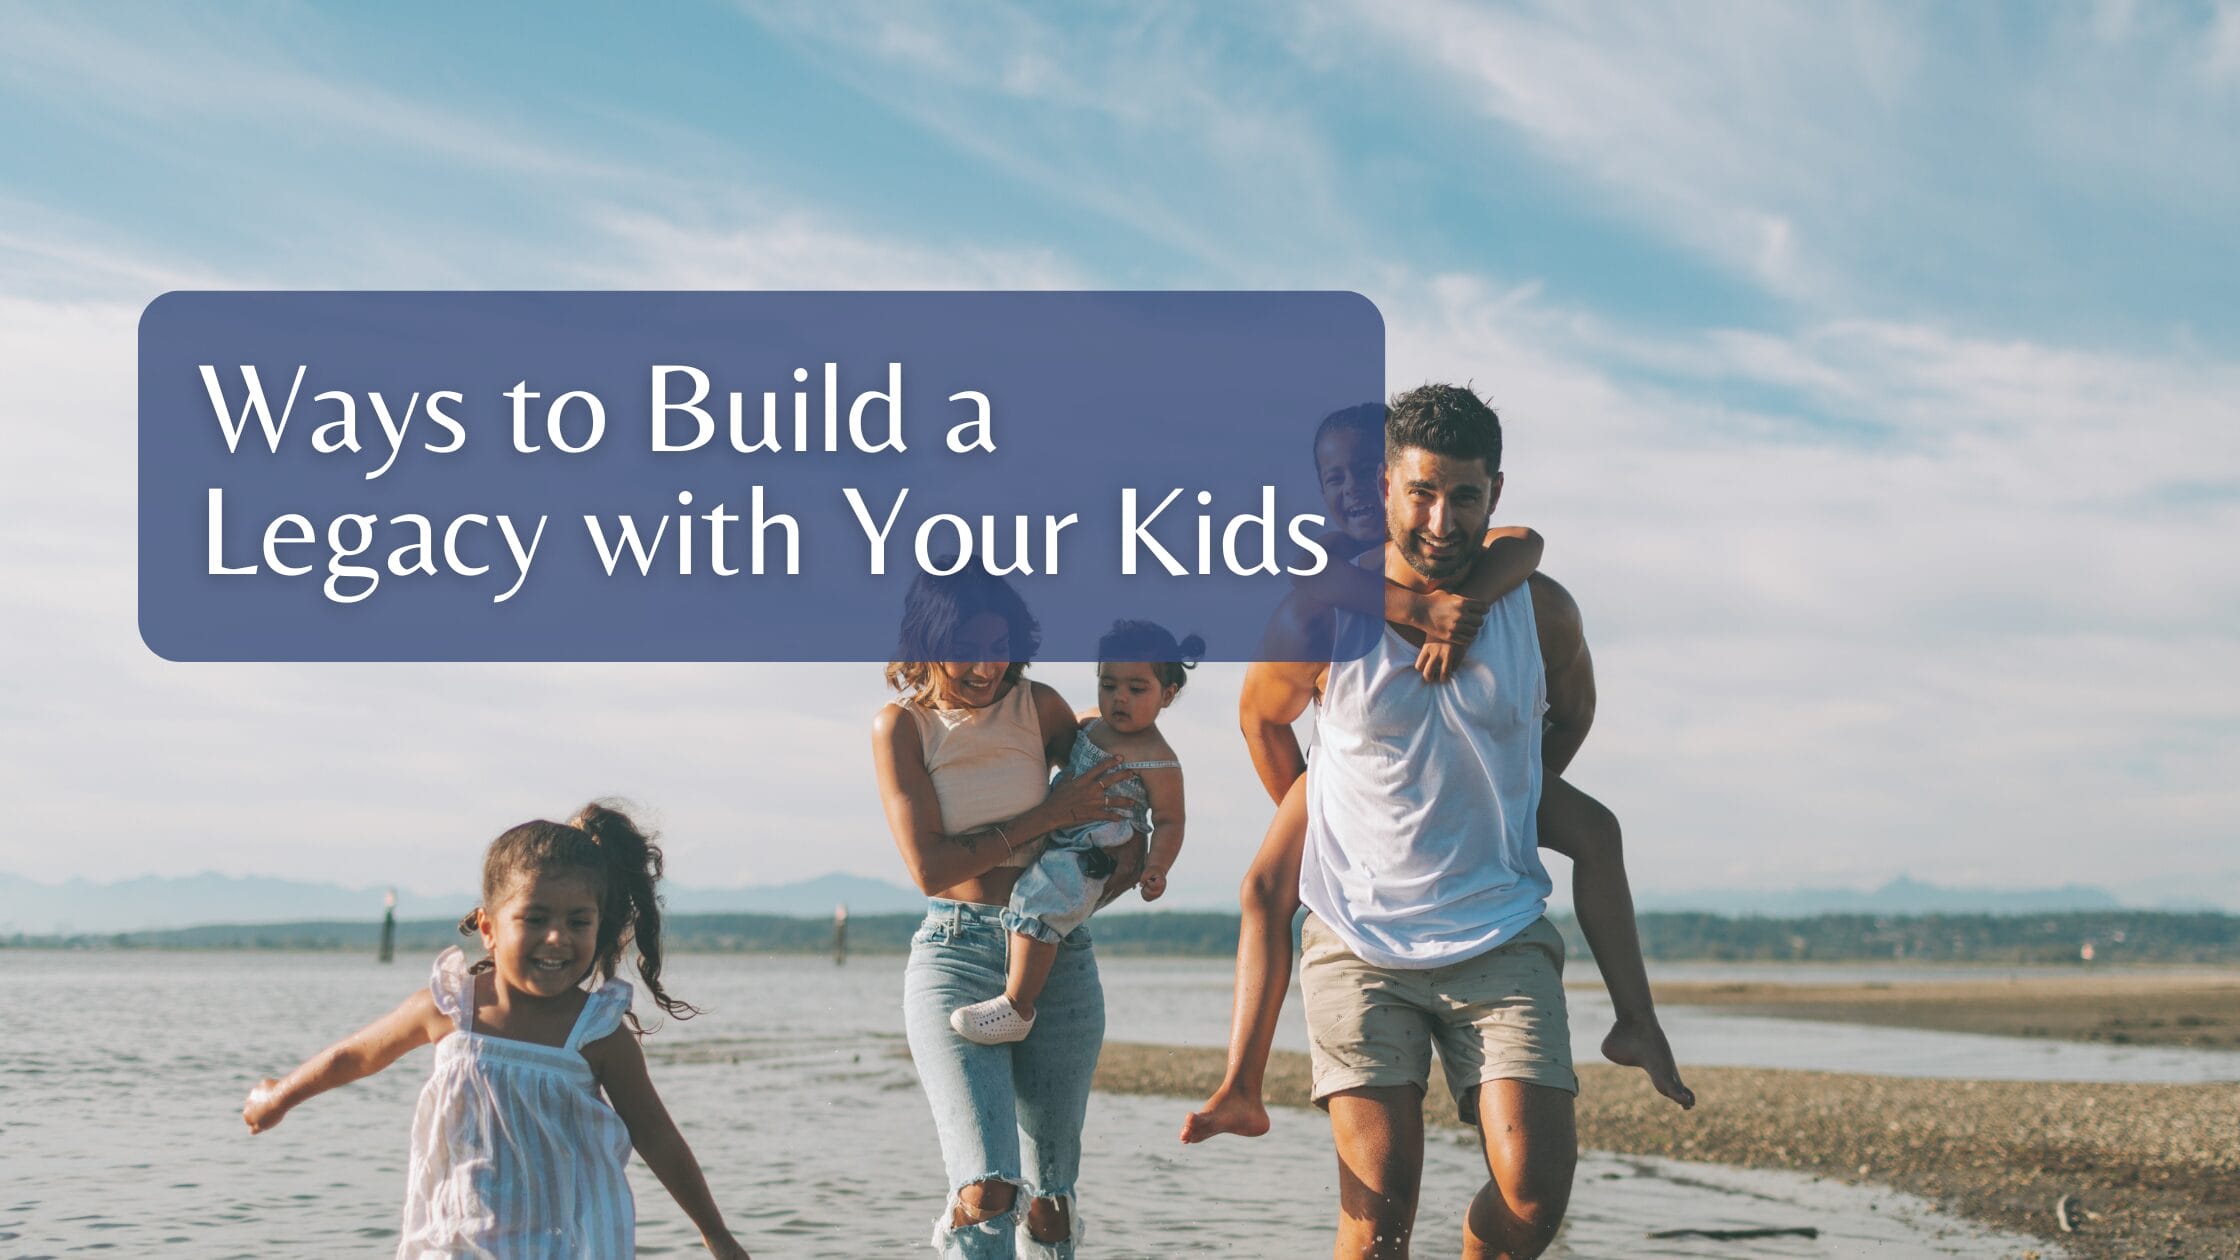 Ways to Build a Legacy with Your Kids